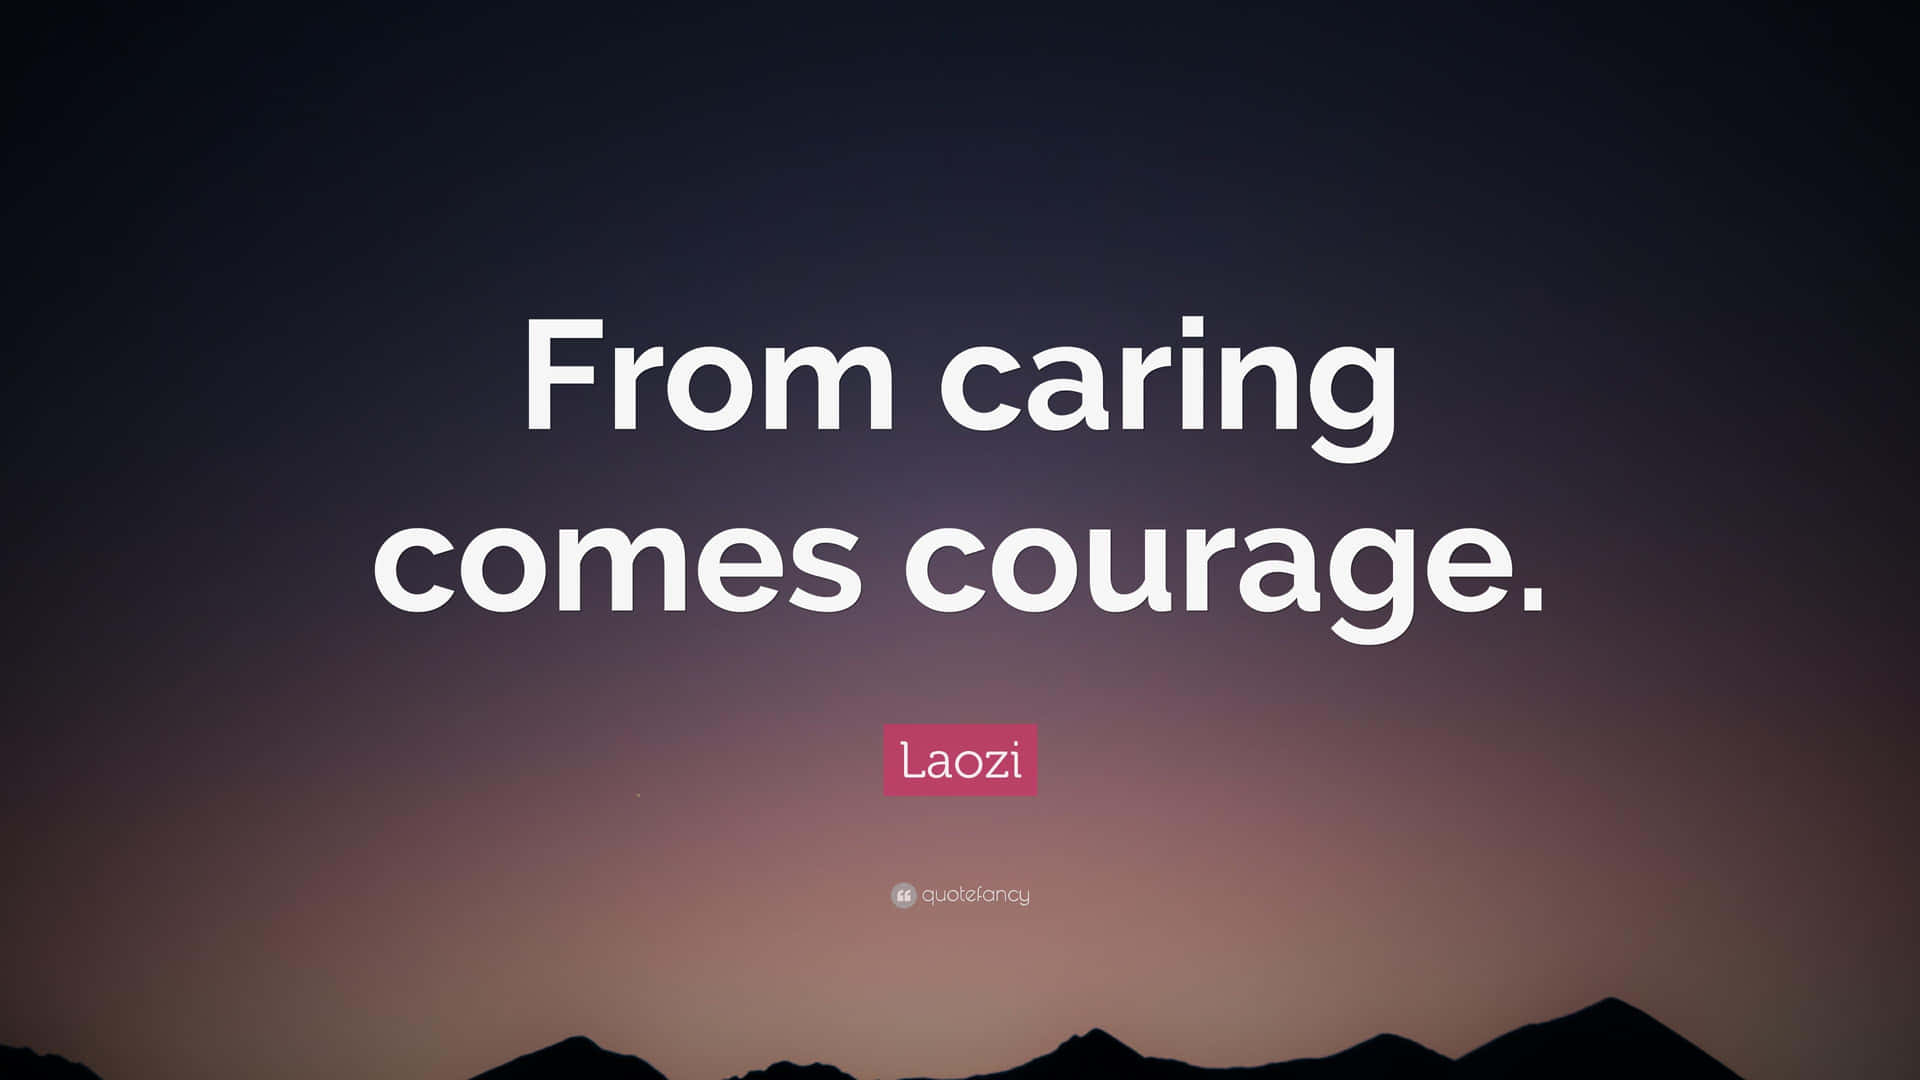 Caring Courage Quoteby Laozi